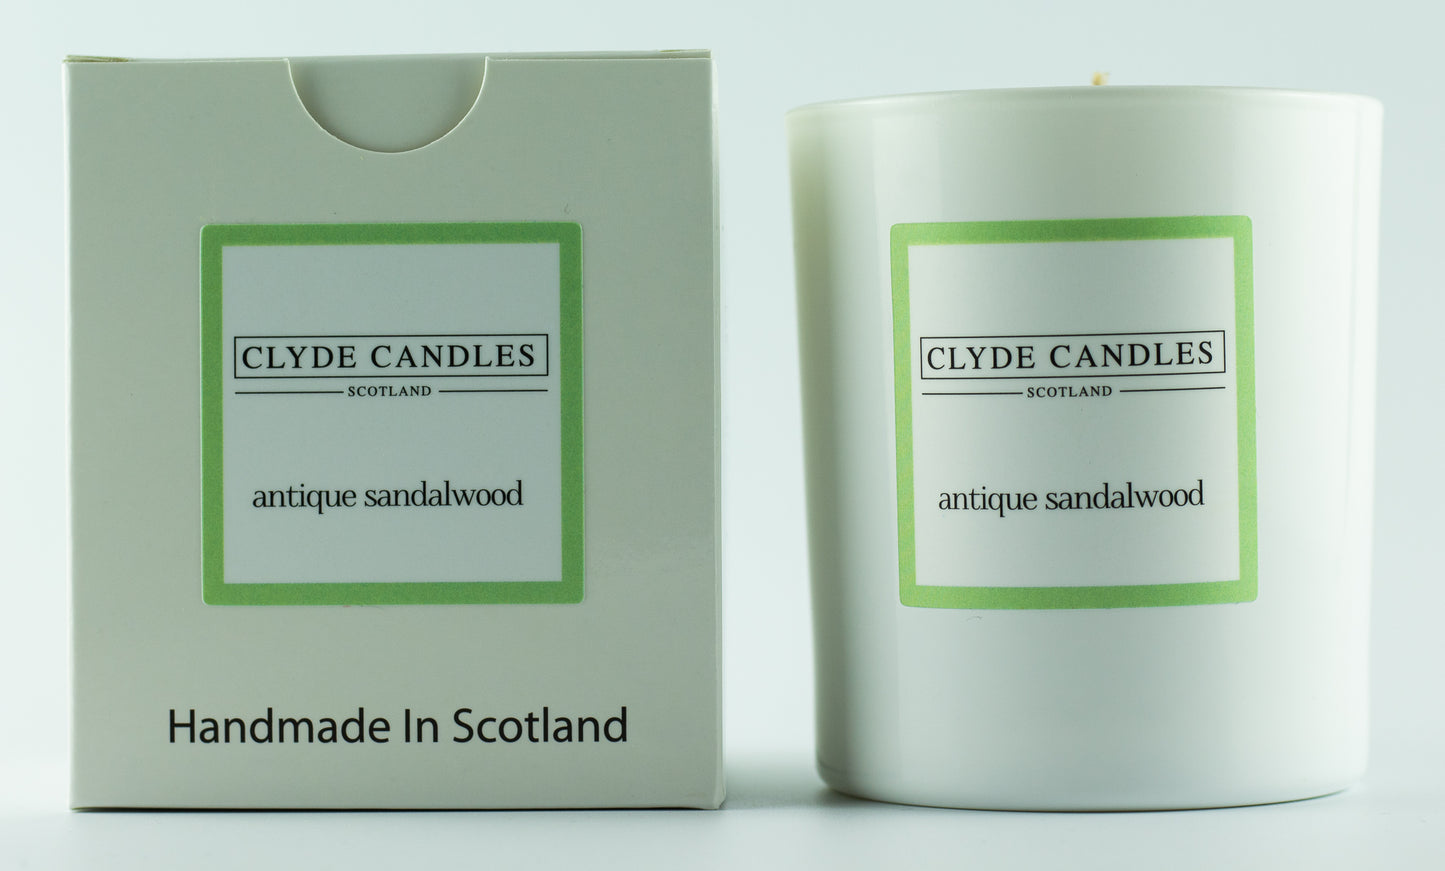 Antique Sandalwood Gift Box Candle - Large Glass Natural Soy wax, Scottish Candles, Clyde Candles